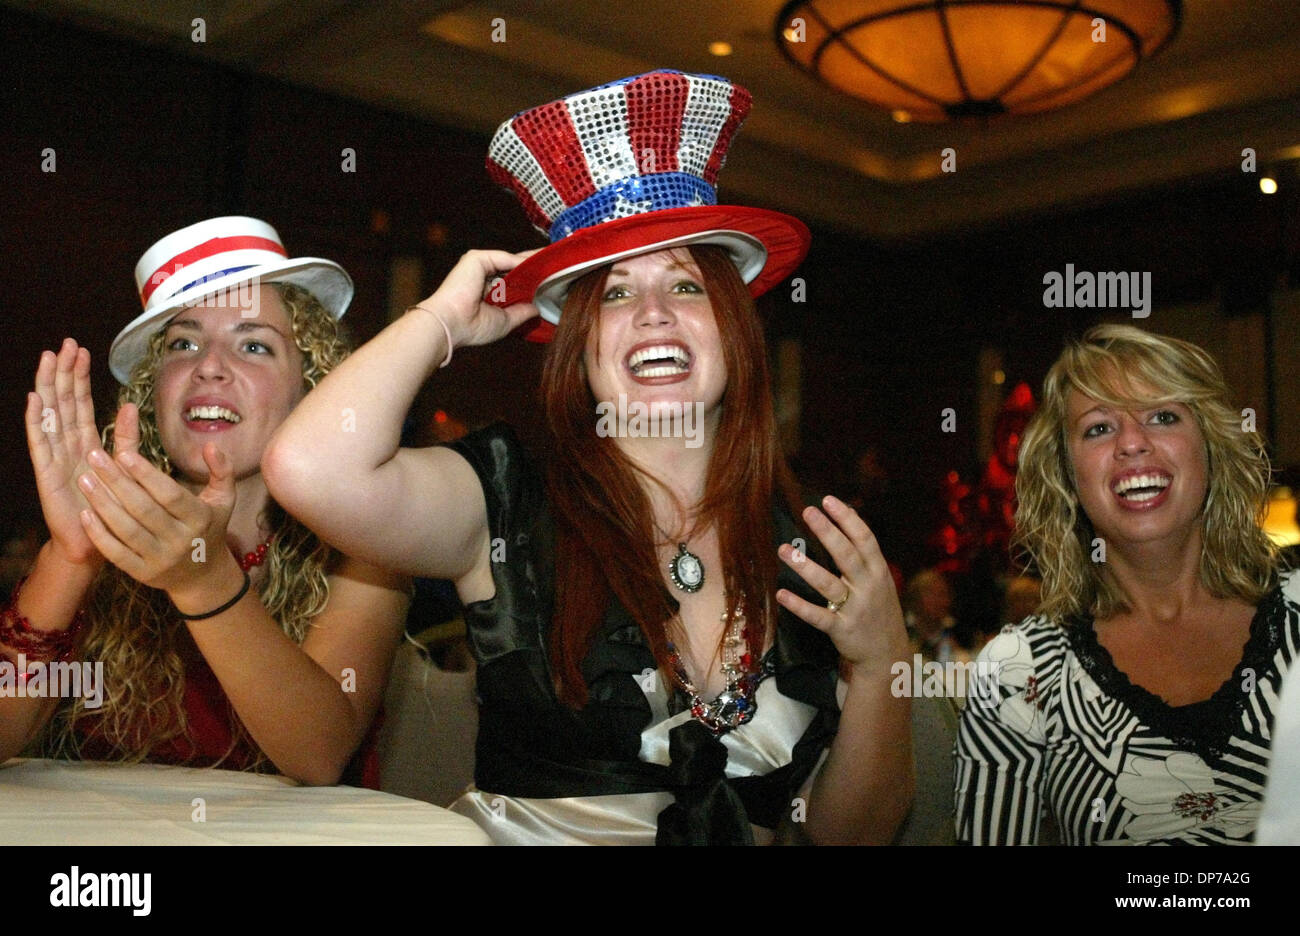 Nov 07, 2006; West Palm Beach, FL, USA; Members of the College Republicans from Palm Beach Atlantic University including from left Sandy Quirk, 18, Tylea Gilmer, 18, and Evan Shaw, 18, cheer Tuesday night around 10:15pm when they hear the numbers for Charlie Crist at a gathering of Palm Beach County Republicans at the Kravis Center.  Members of the club volunteered on the Clay Shaw Stock Photo